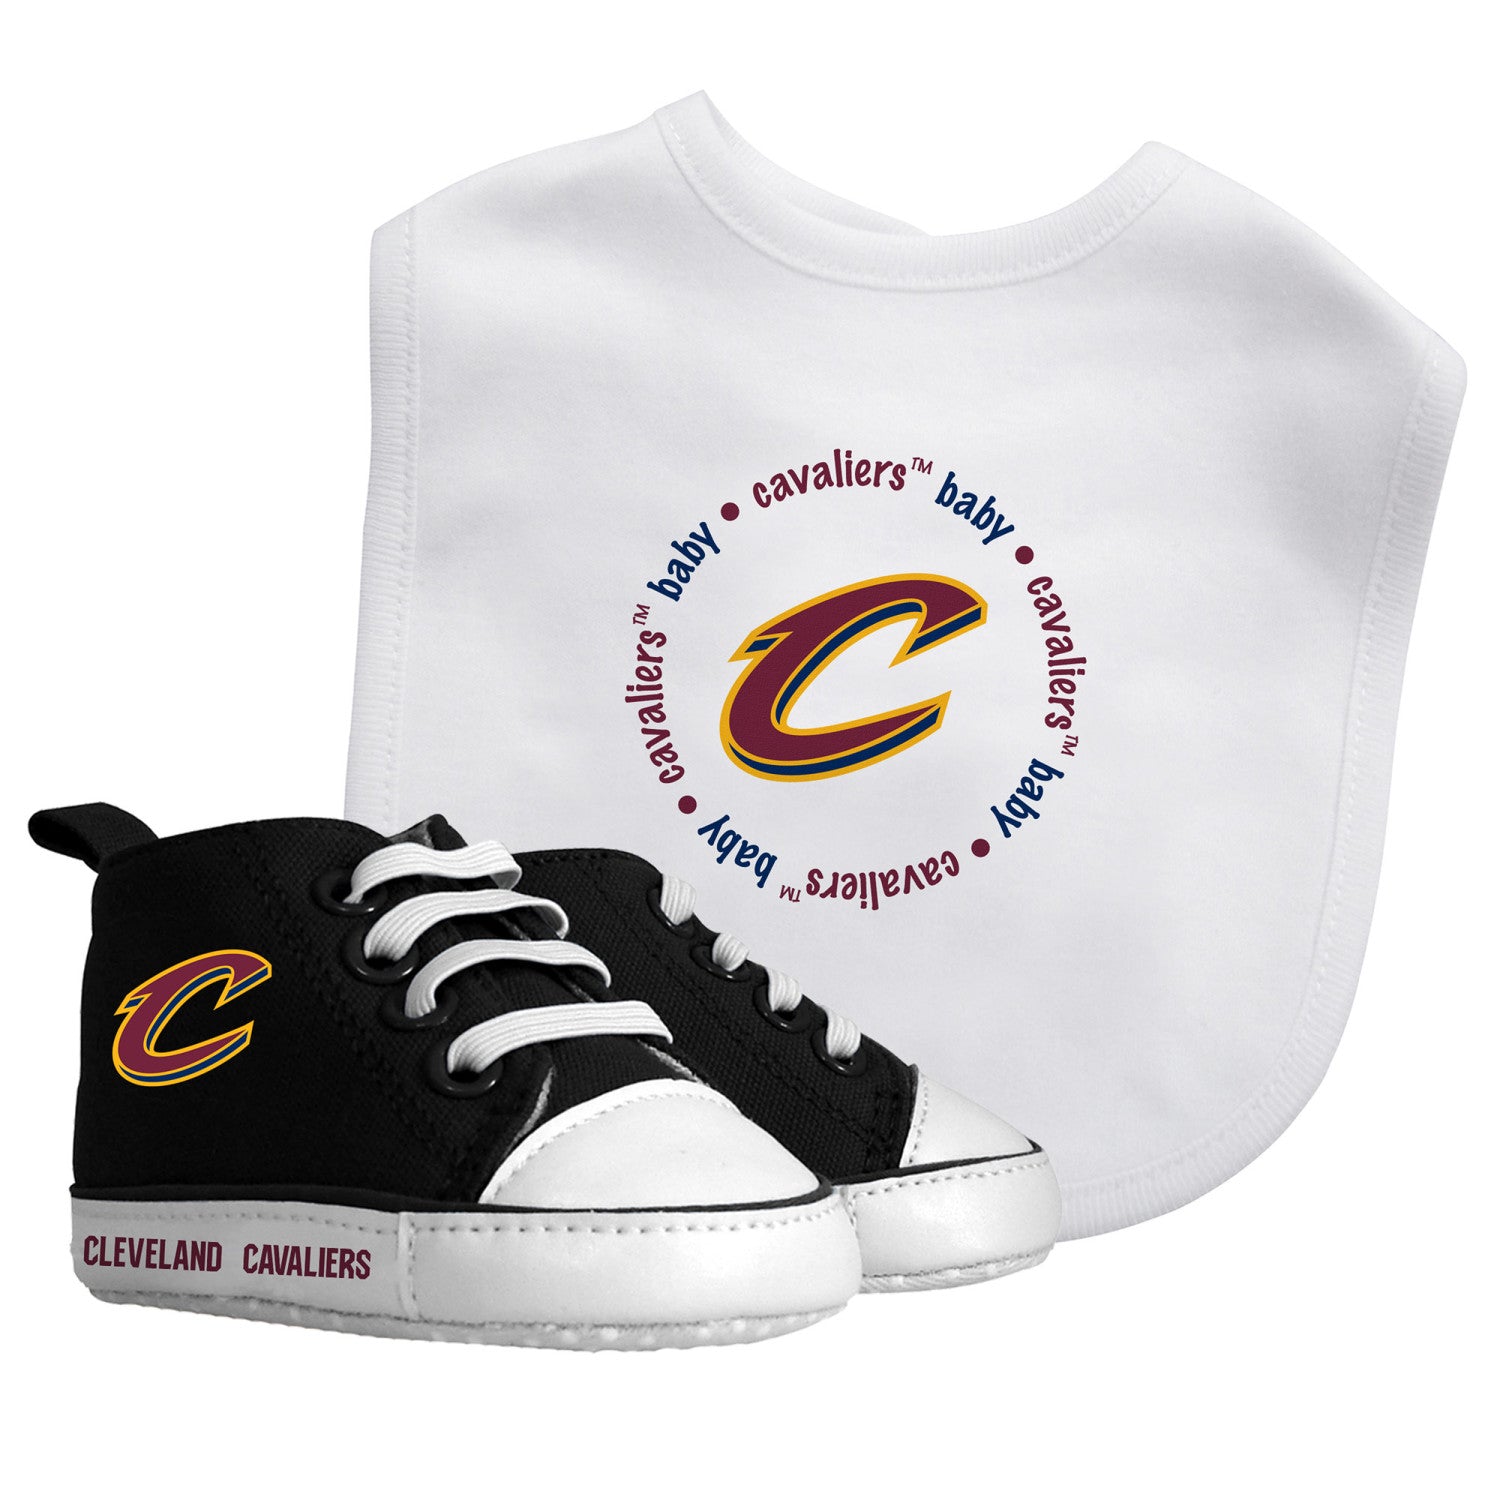 Cleveland Cavaliers - 2-Piece Baby Gift Set